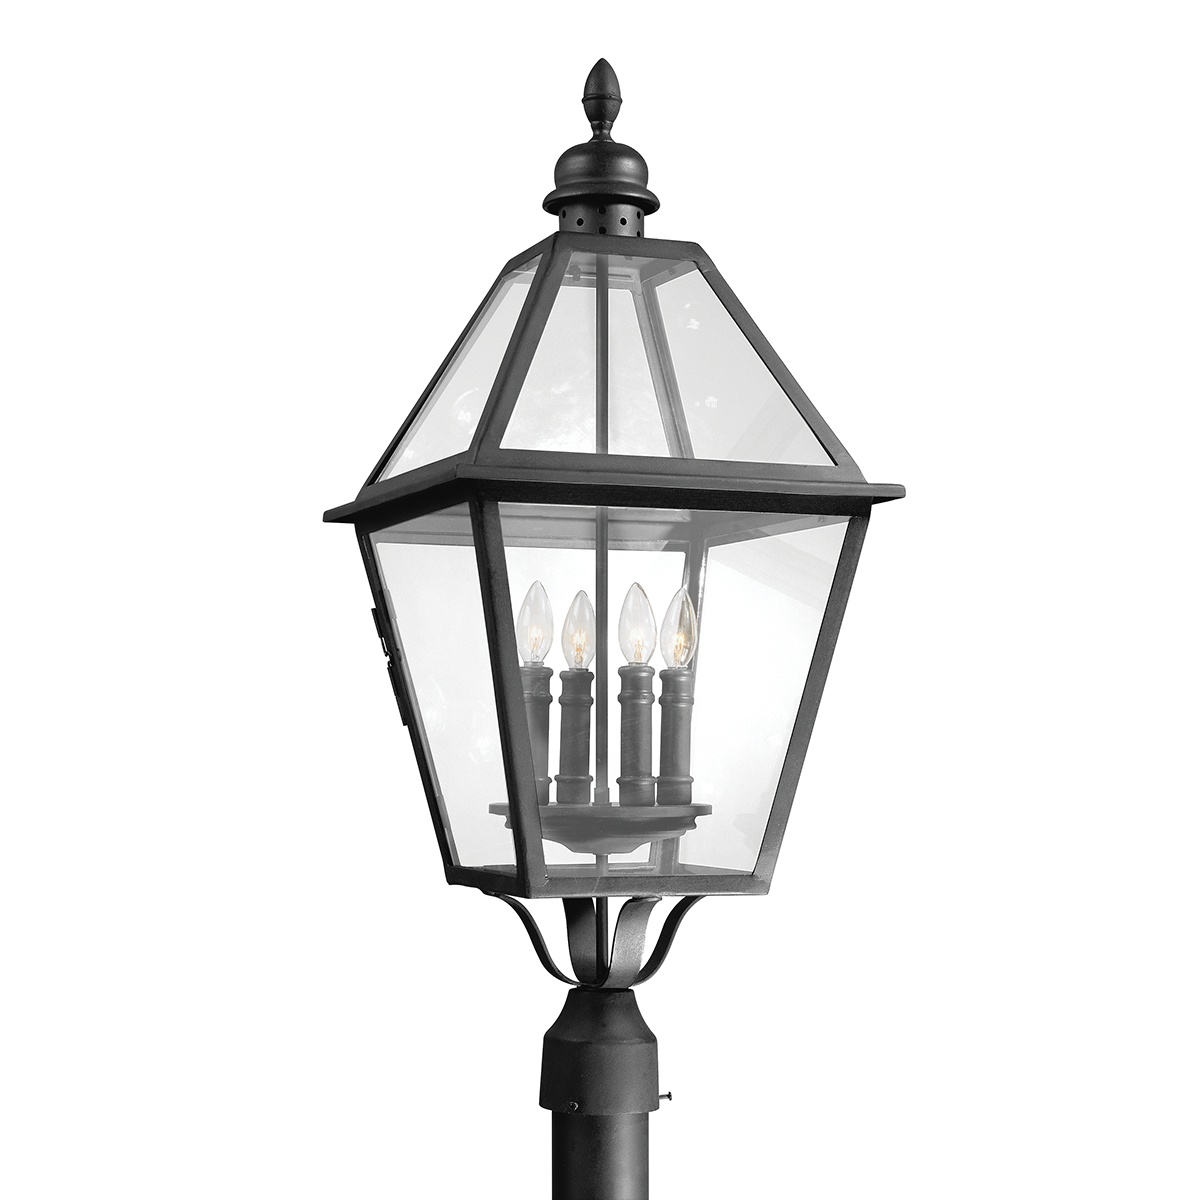 Troy Lighting TOWNSEND 4LT POST LANTERN EXTRA LARGE P9626 Outdoor l Post/Pier Mounts Troy Lighting NATURAL BRONZE  